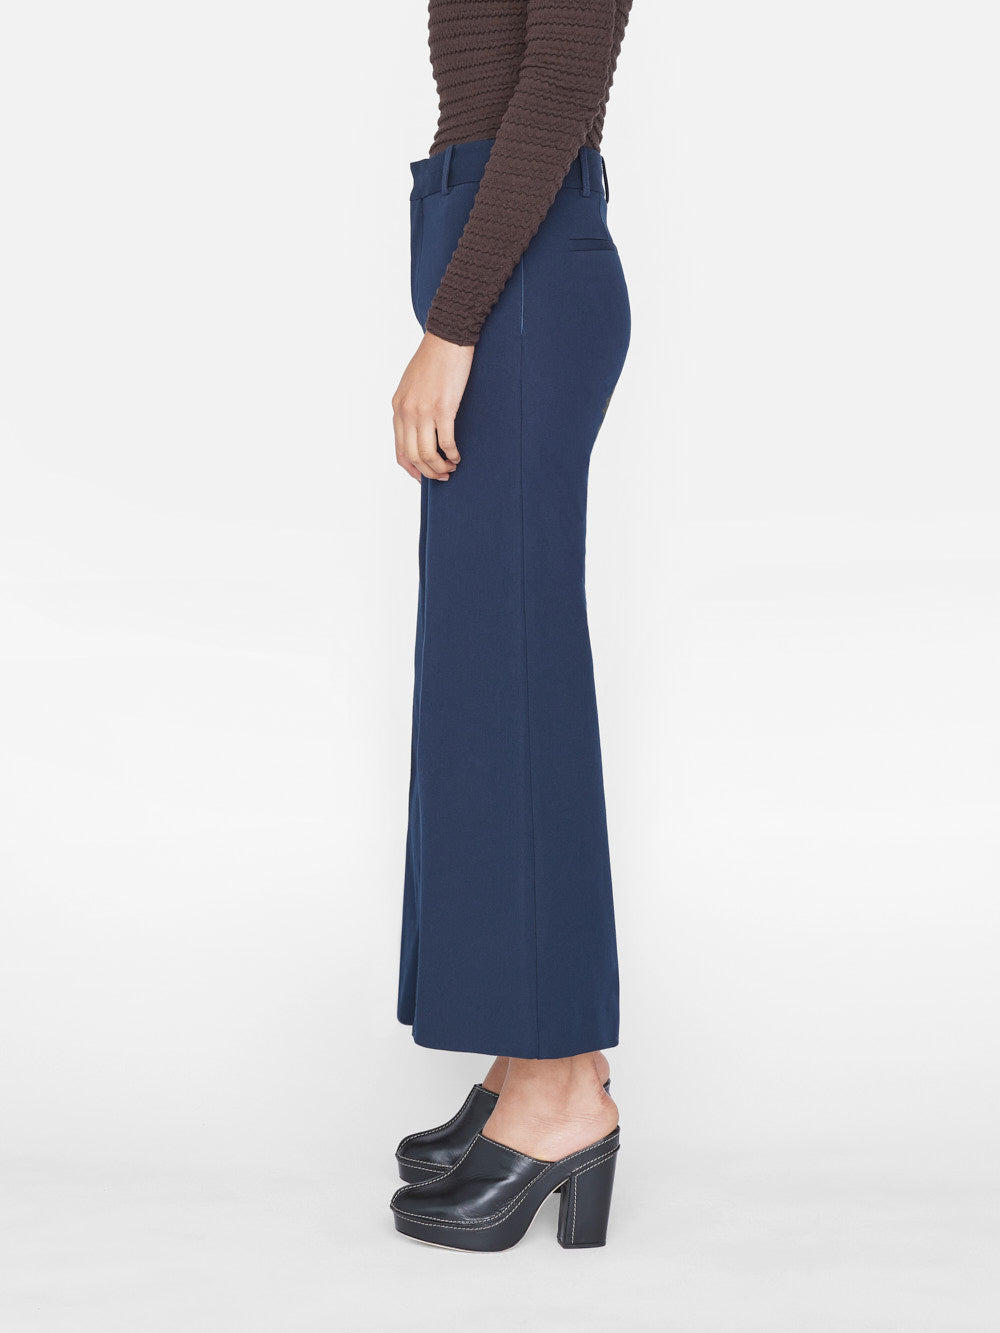 Buy online Blue Solid Straight Pant from Skirts, tapered pants & Palazzos  for Women by W for ₹650 at 54% off